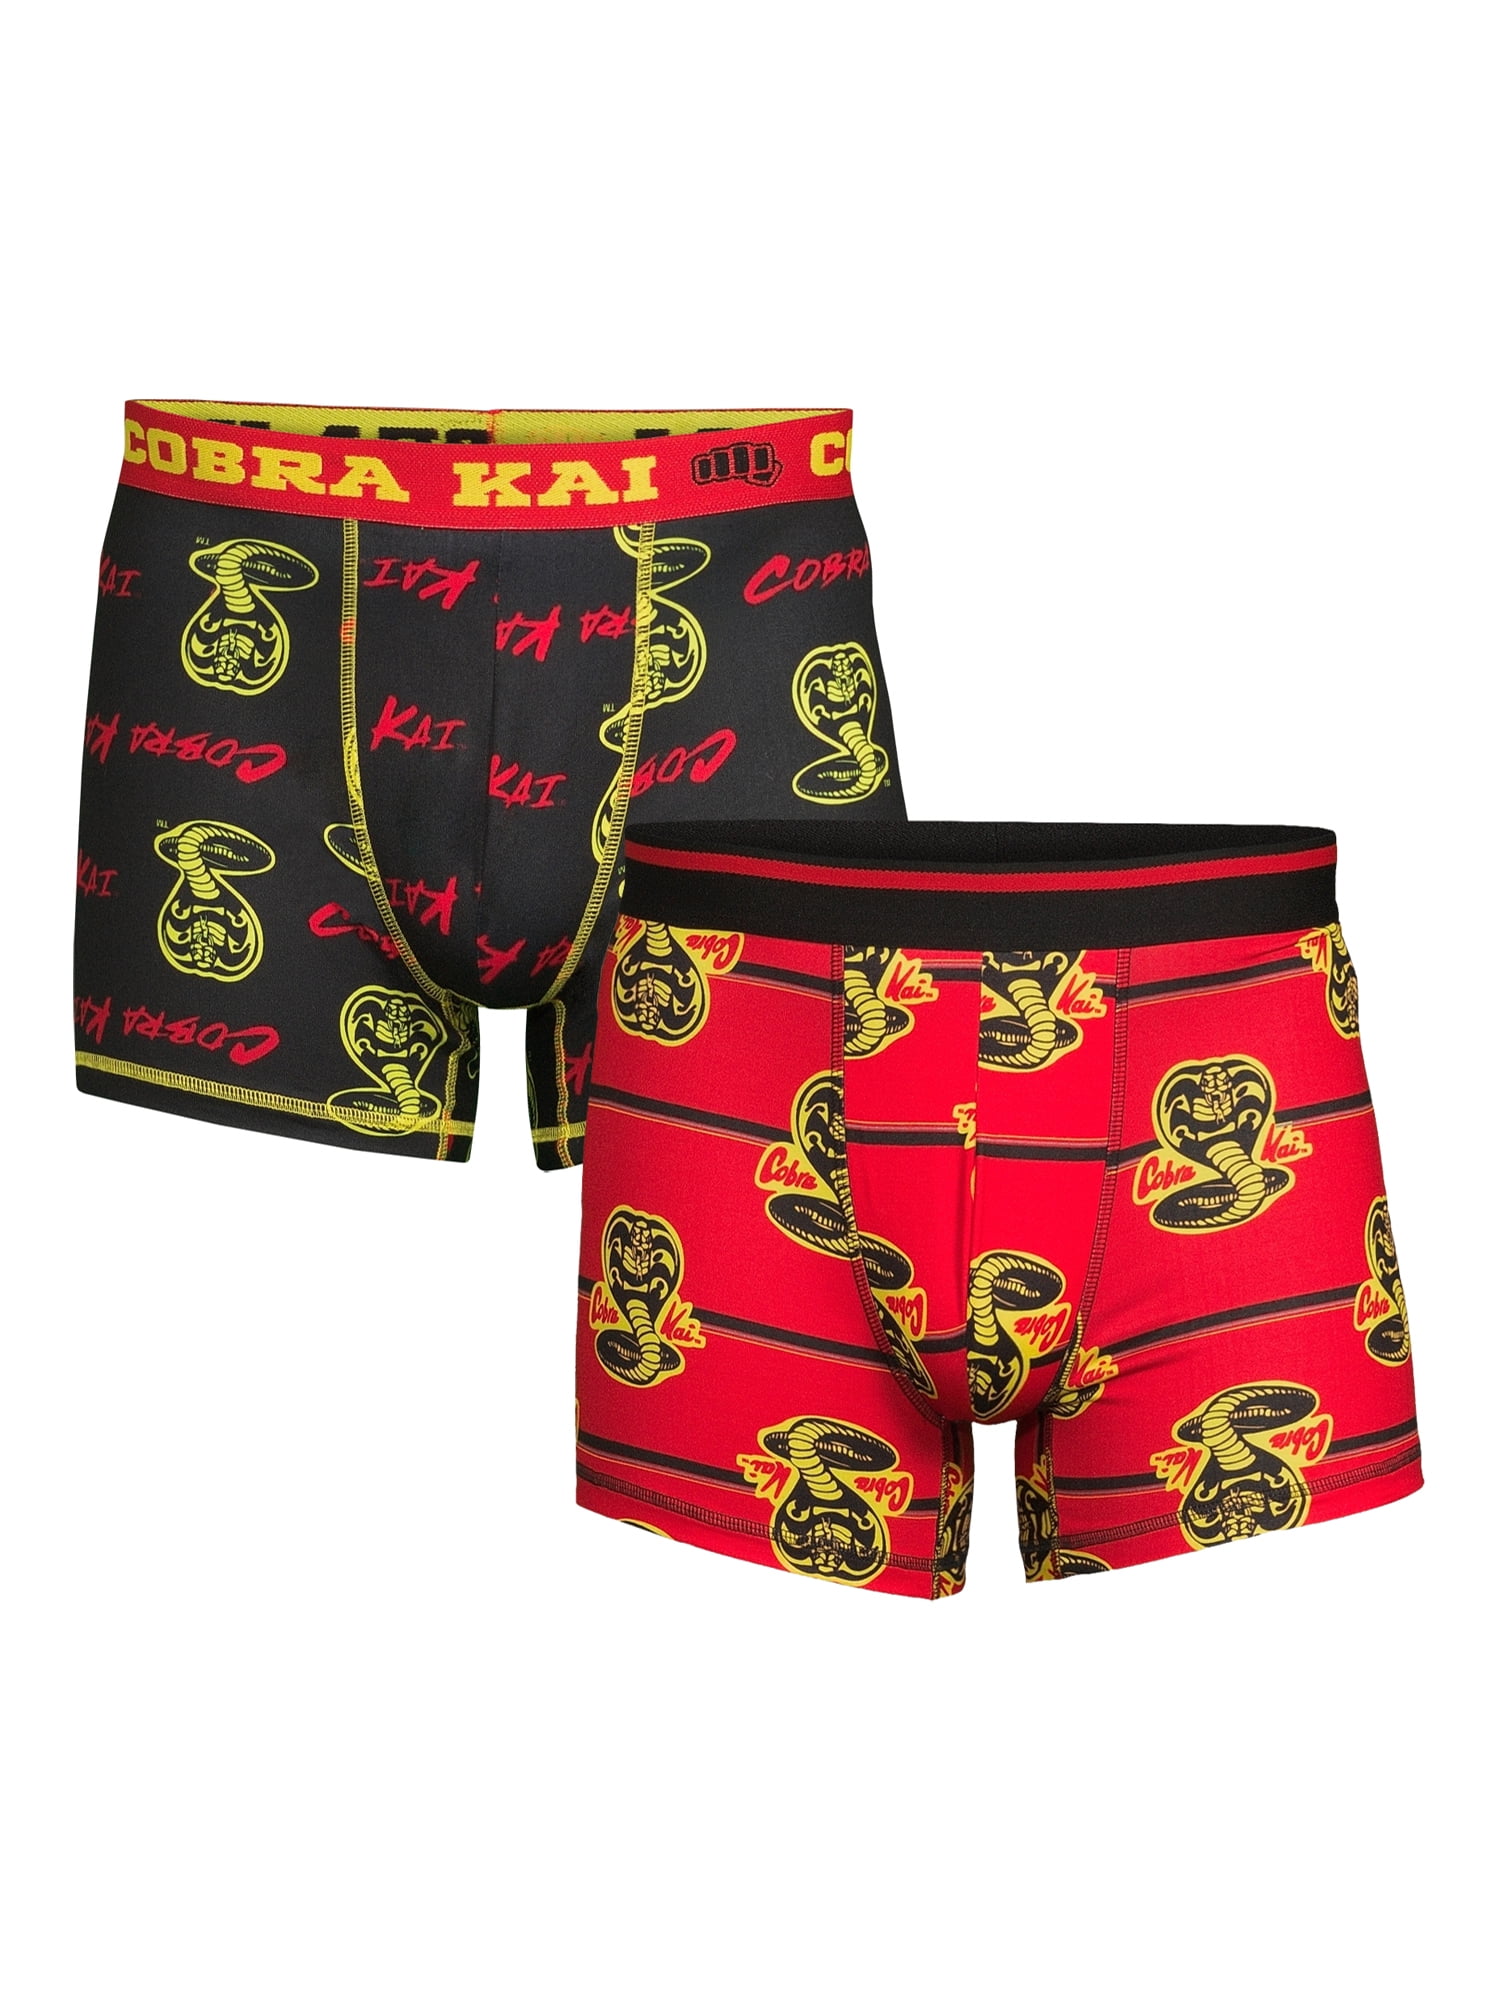 Boxer for Mens in Microfiber-Assortment Models Photos According to Arrivals Star Wars 